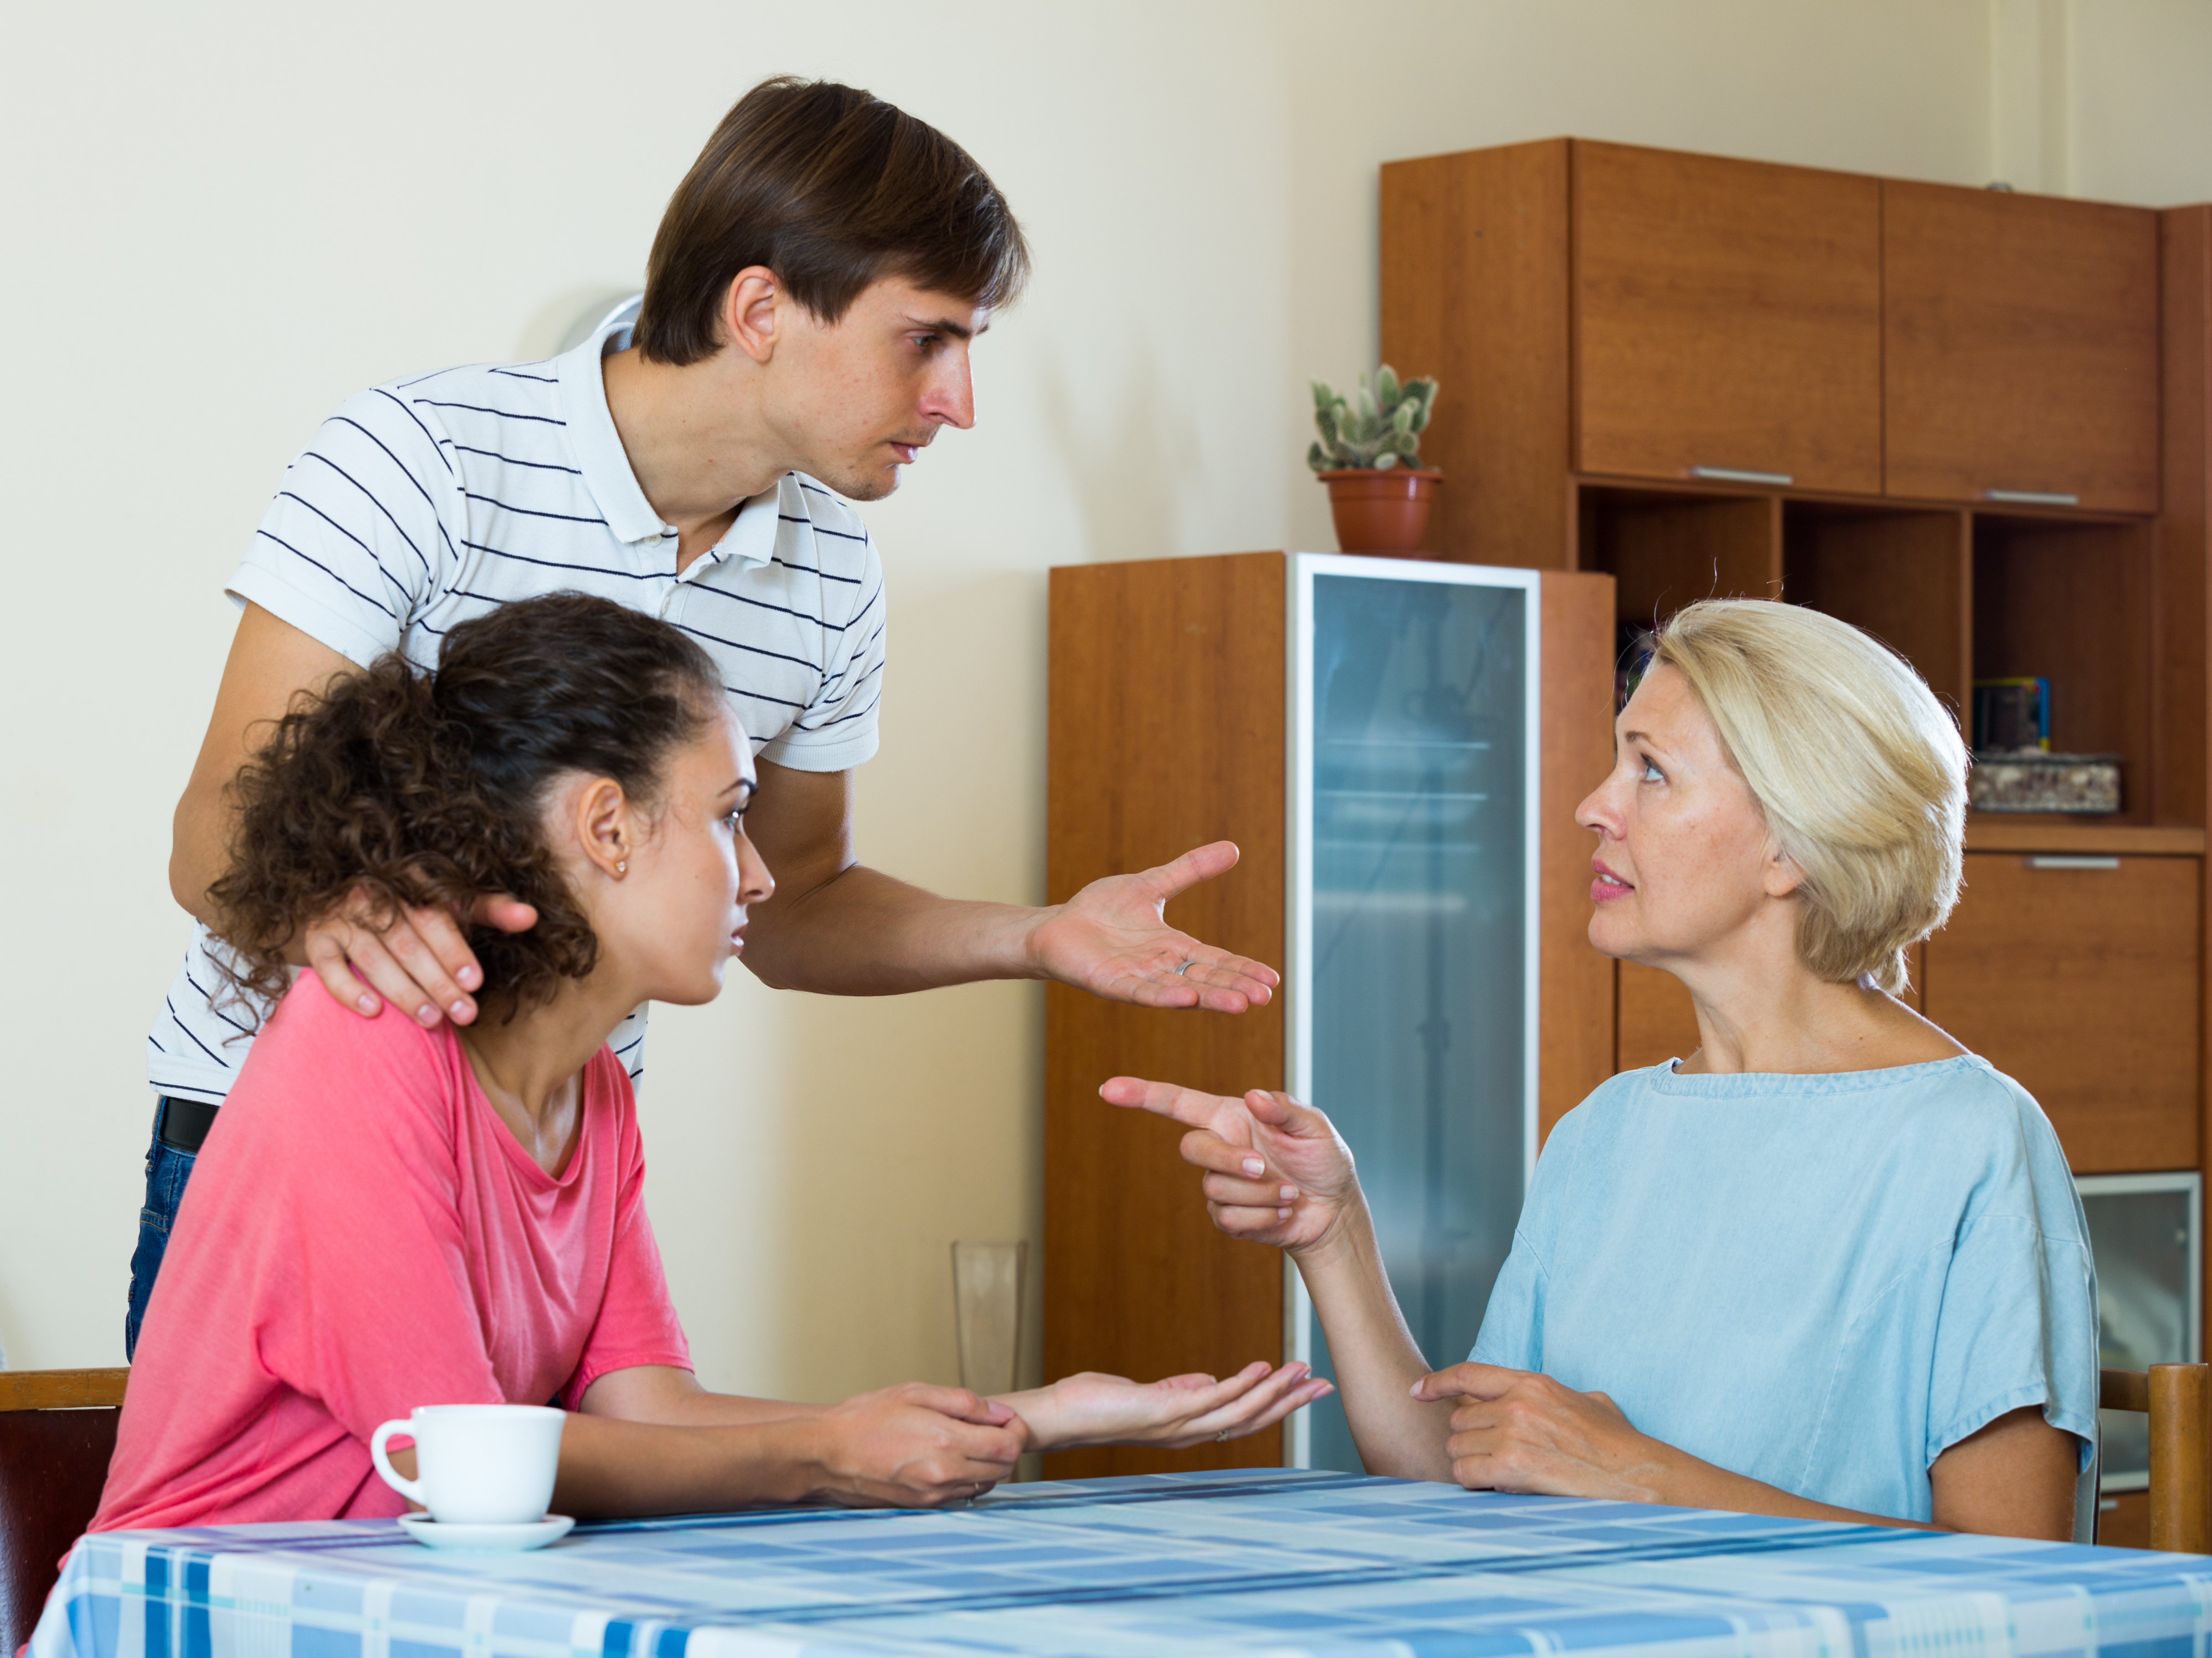 A young couple is seen having a serious discussion with their mother | Source: Shutterstock